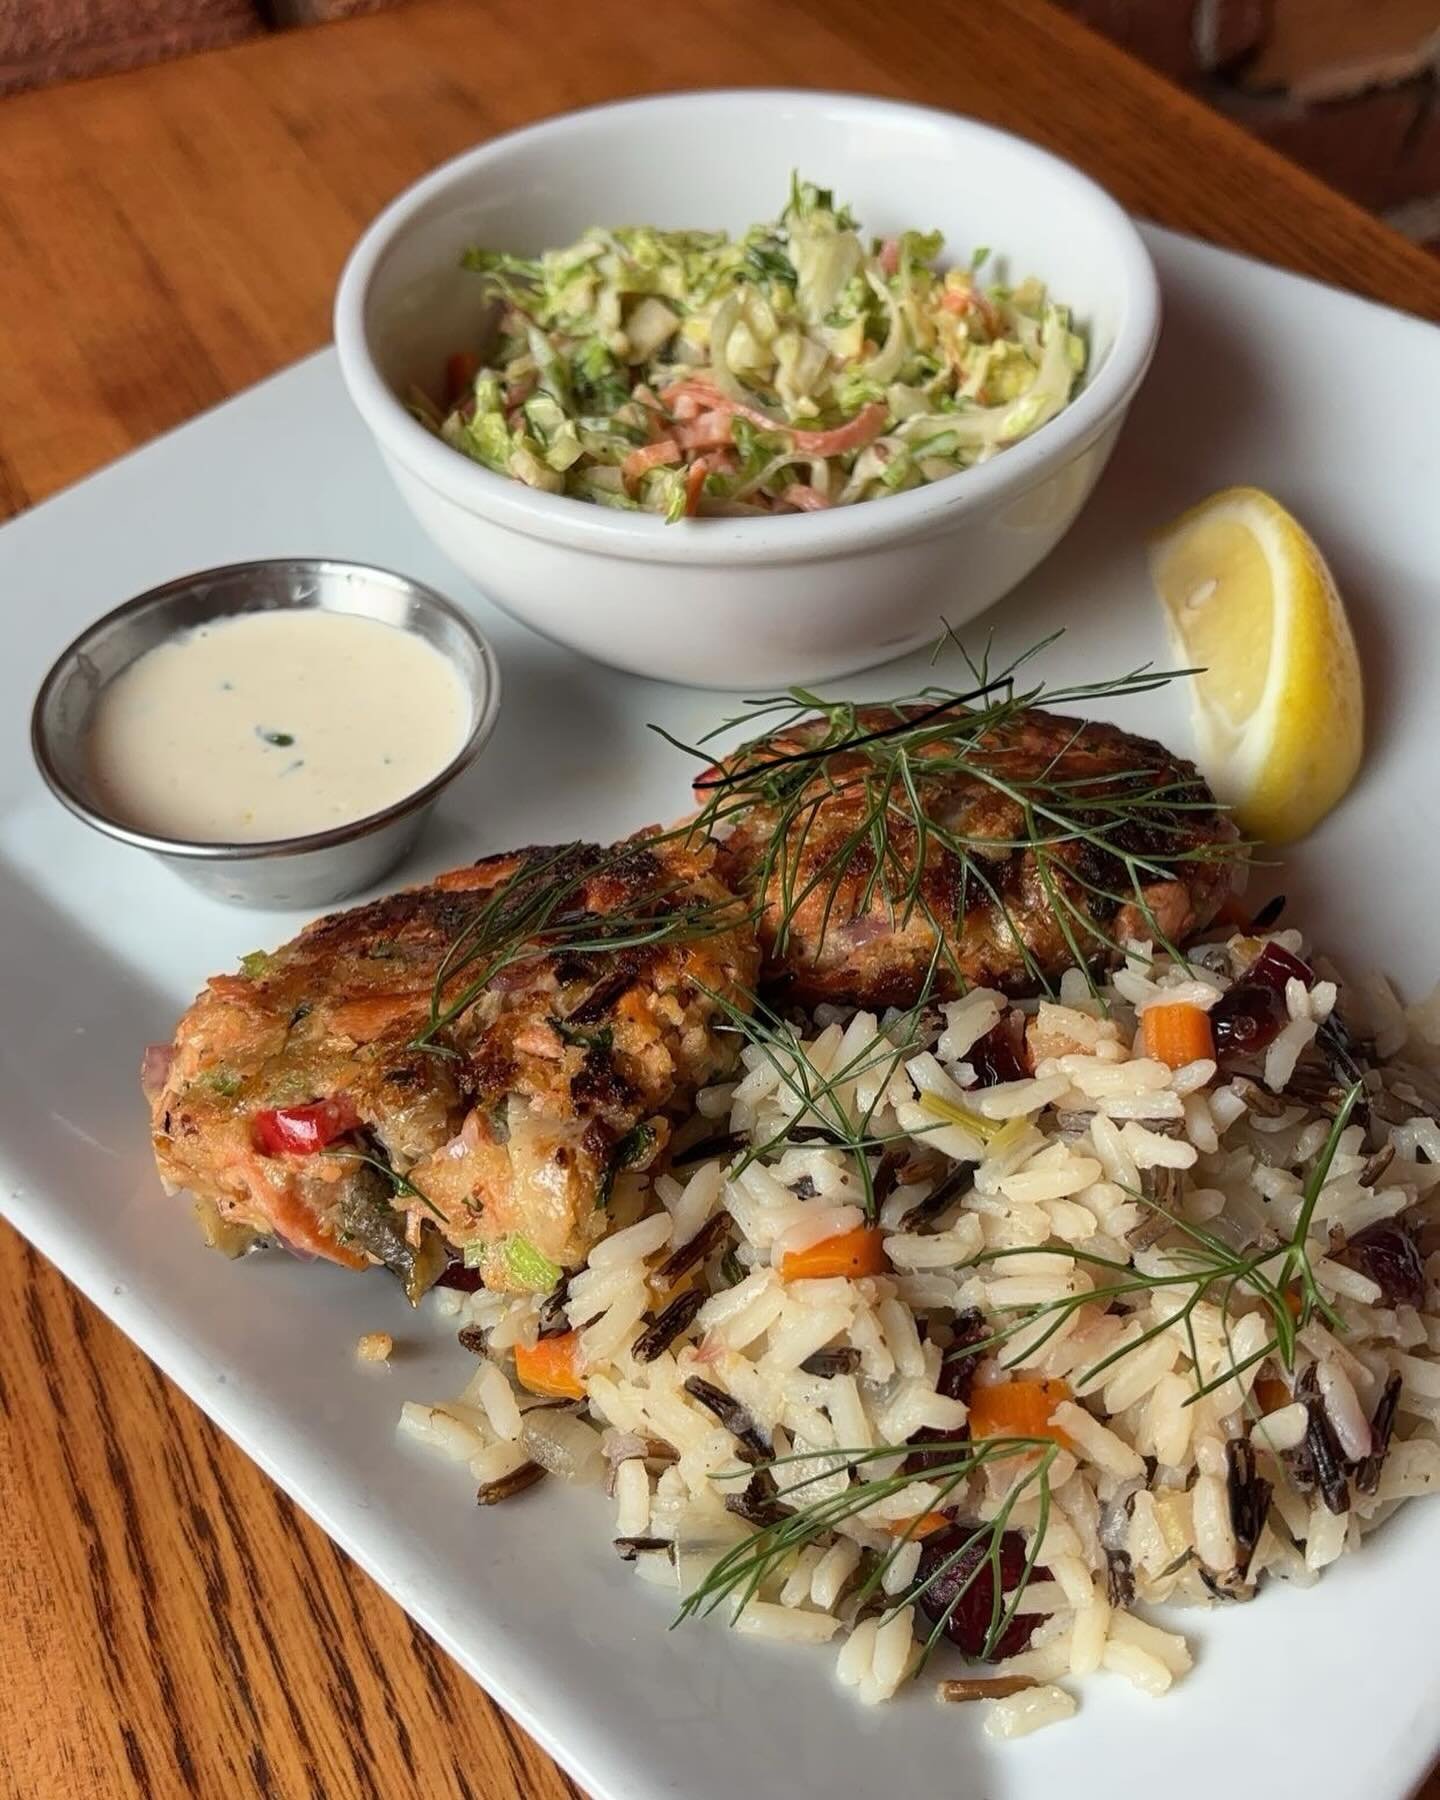 This weekend&rsquo;s special! Salmon croquettes with a lemon yogurt sauce, wild rice pilaf, and brussels sprout slaw - stop in to try it before it&rsquo;s gone 🍋